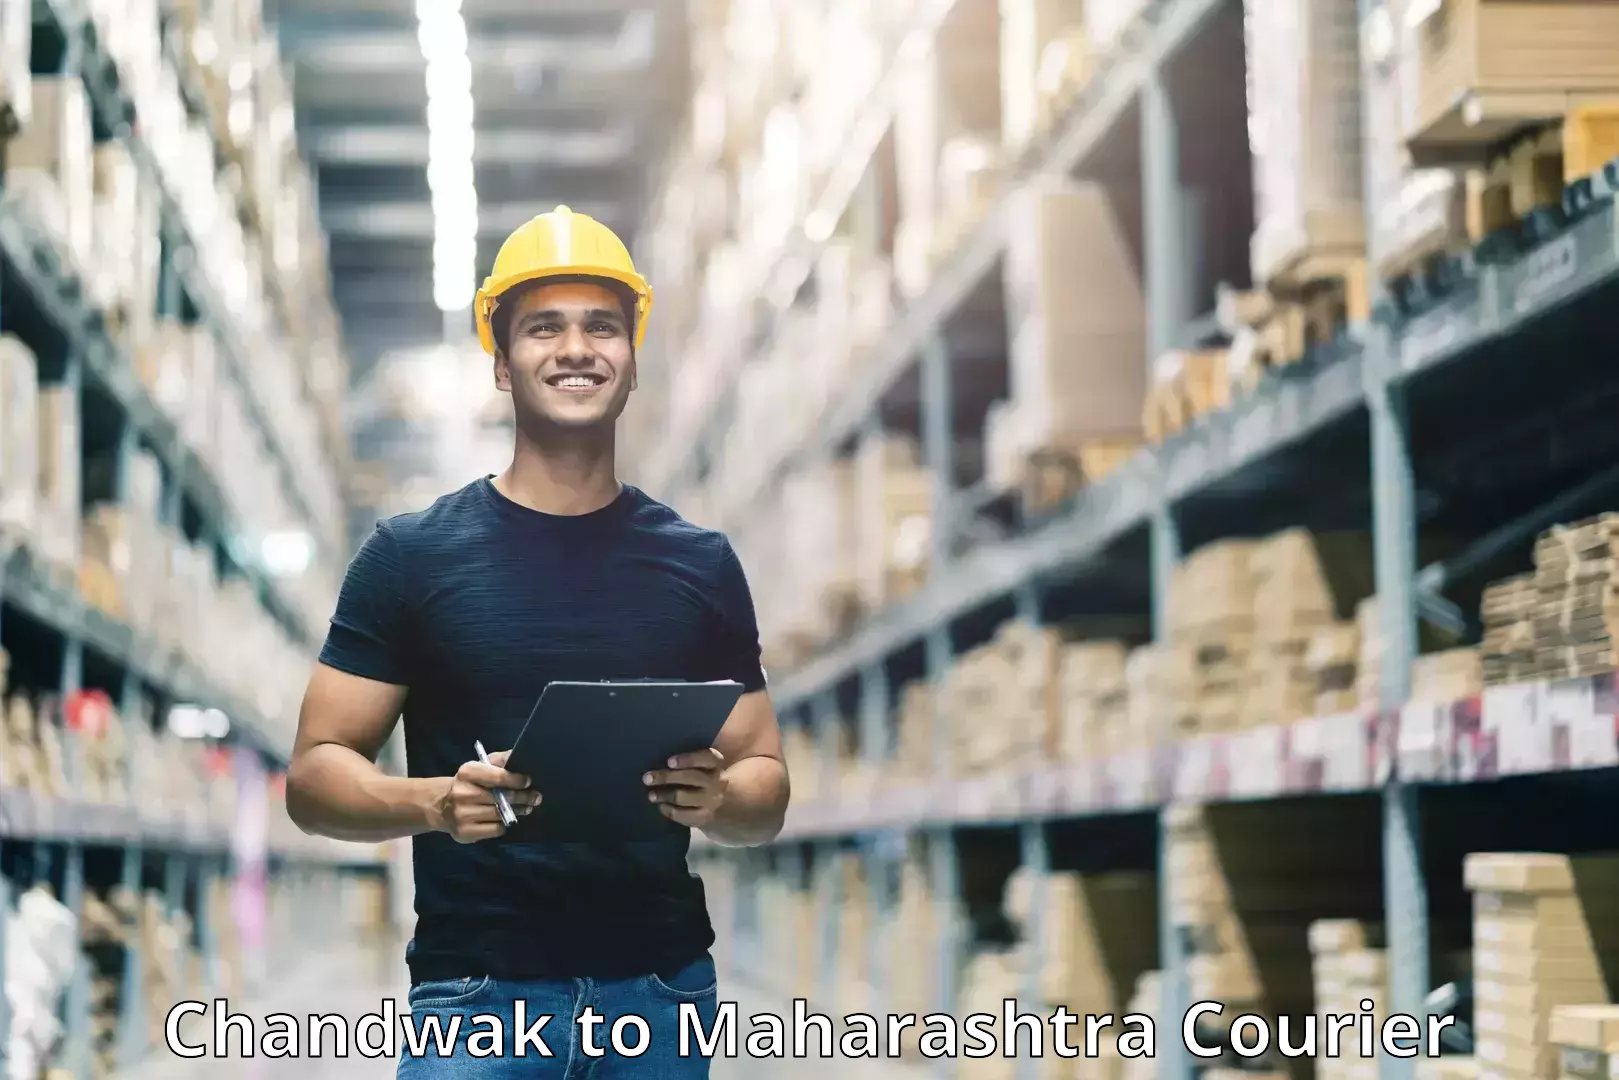 Professional courier services Chandwak to Mahabaleshwar